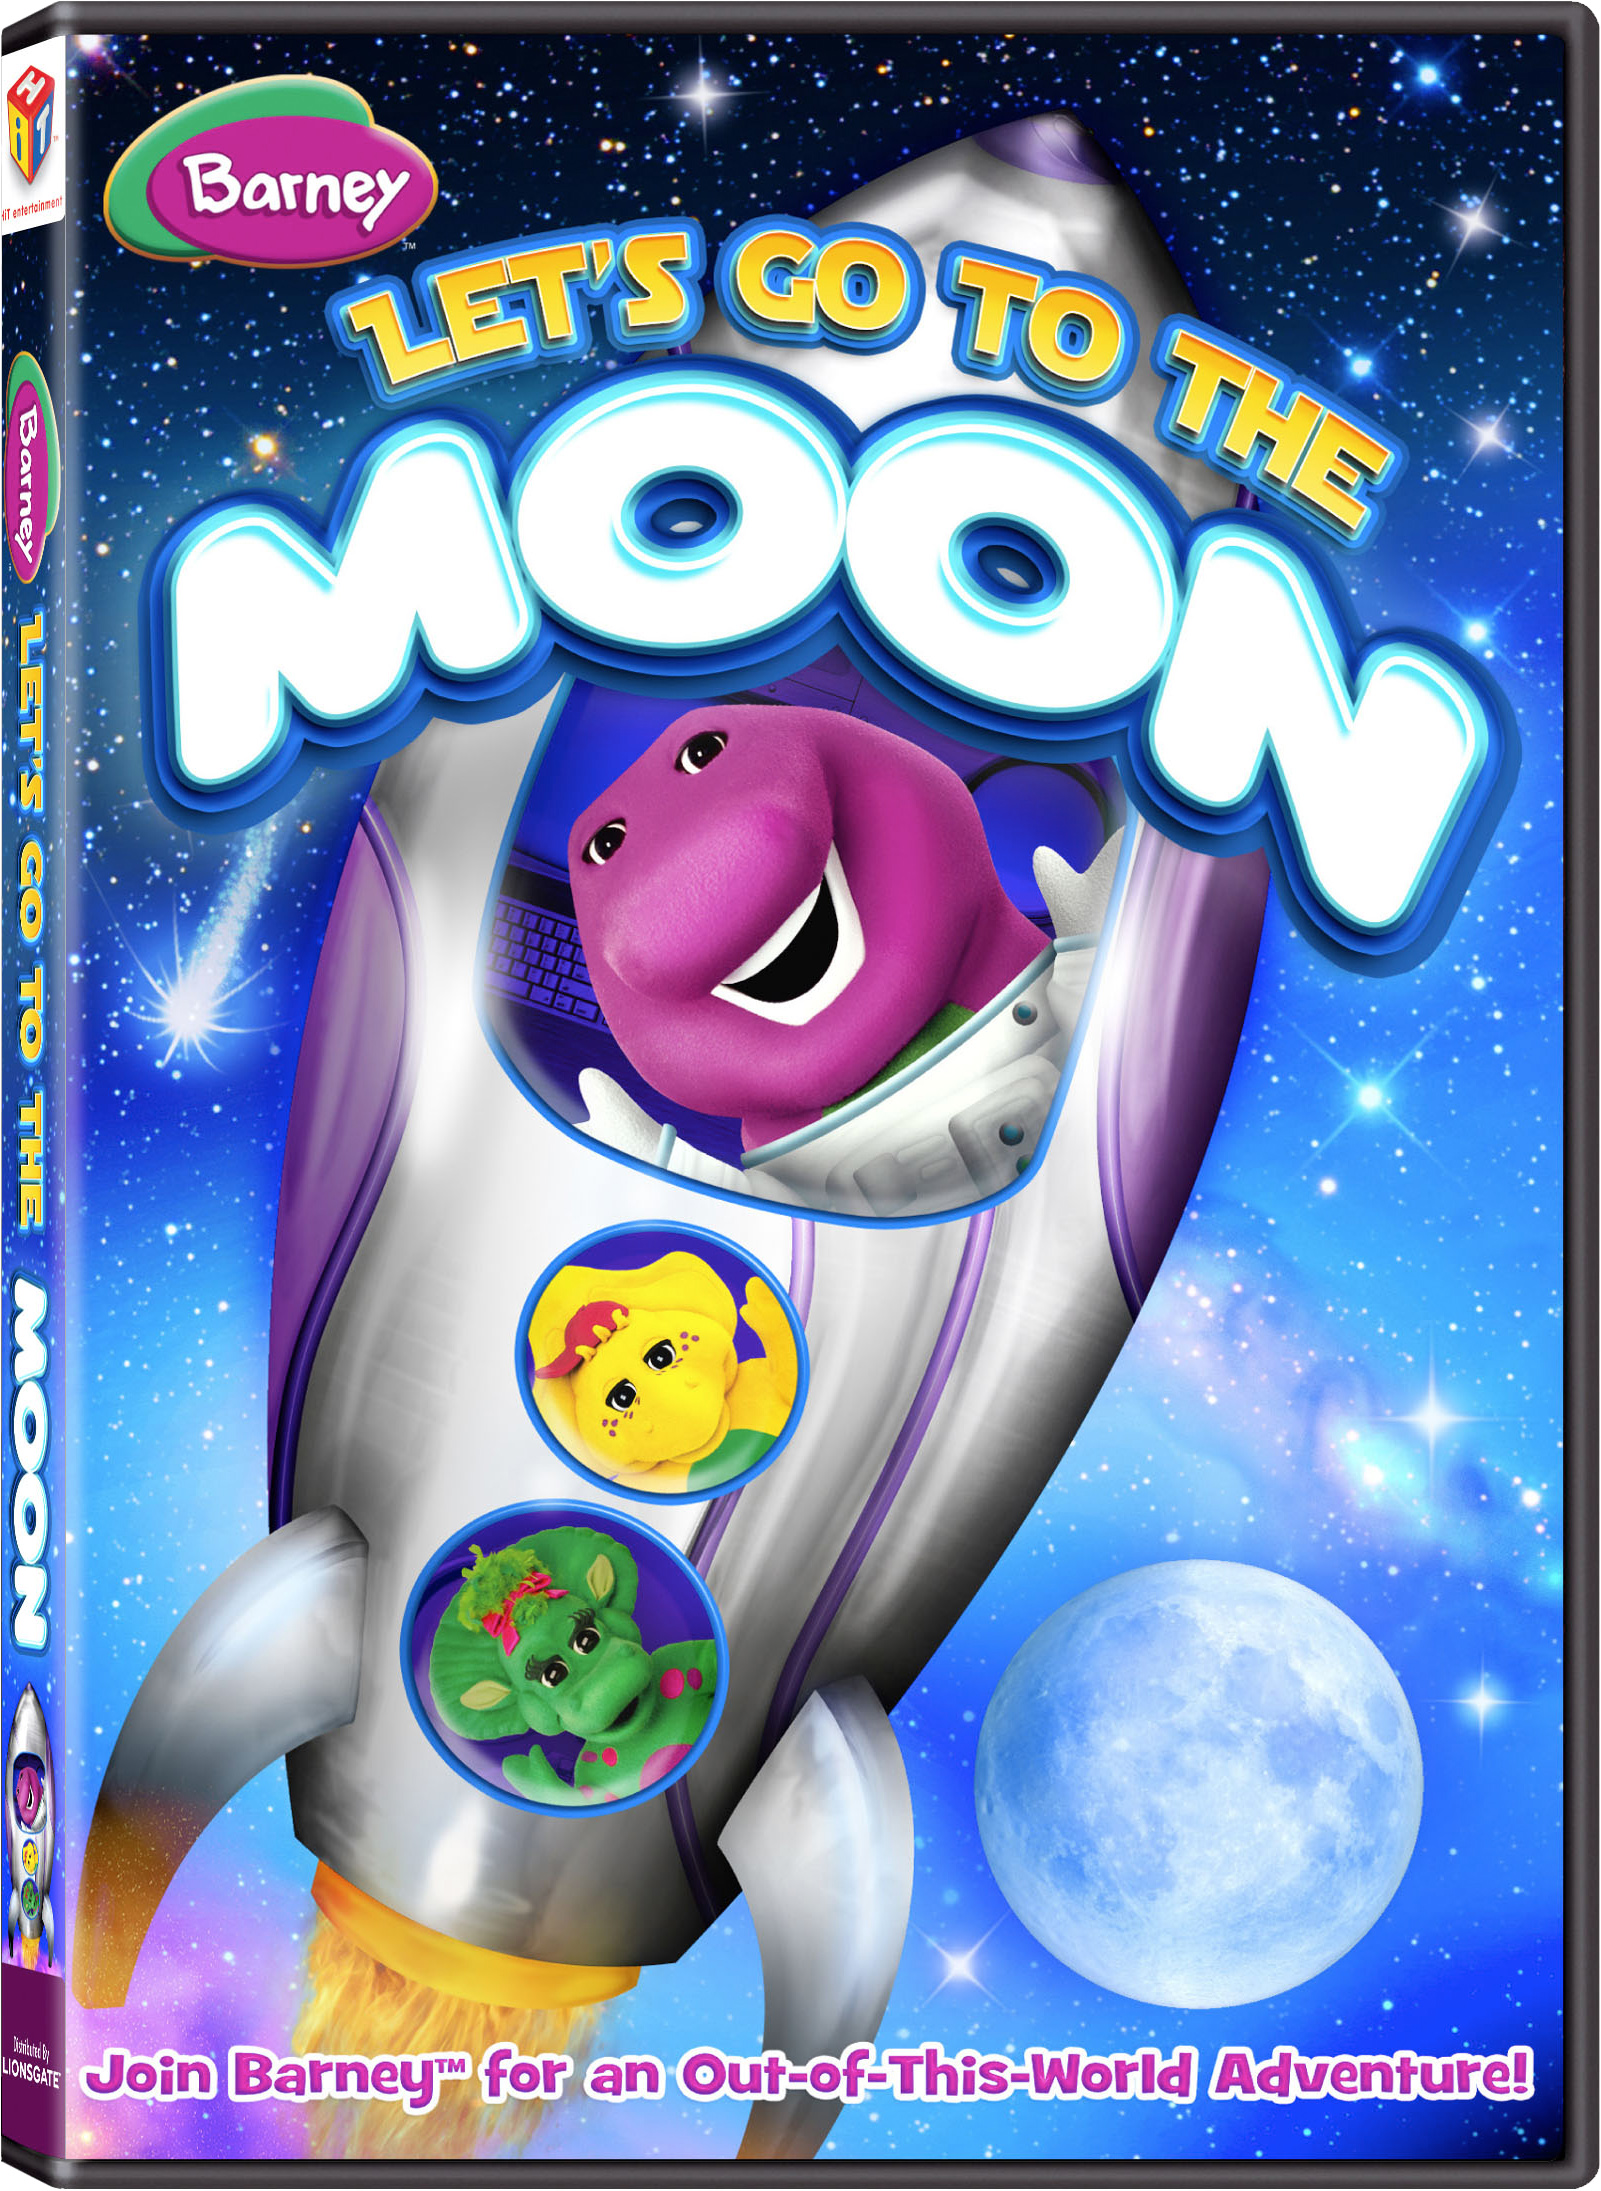 Barney: Let’s Go To The Moon.